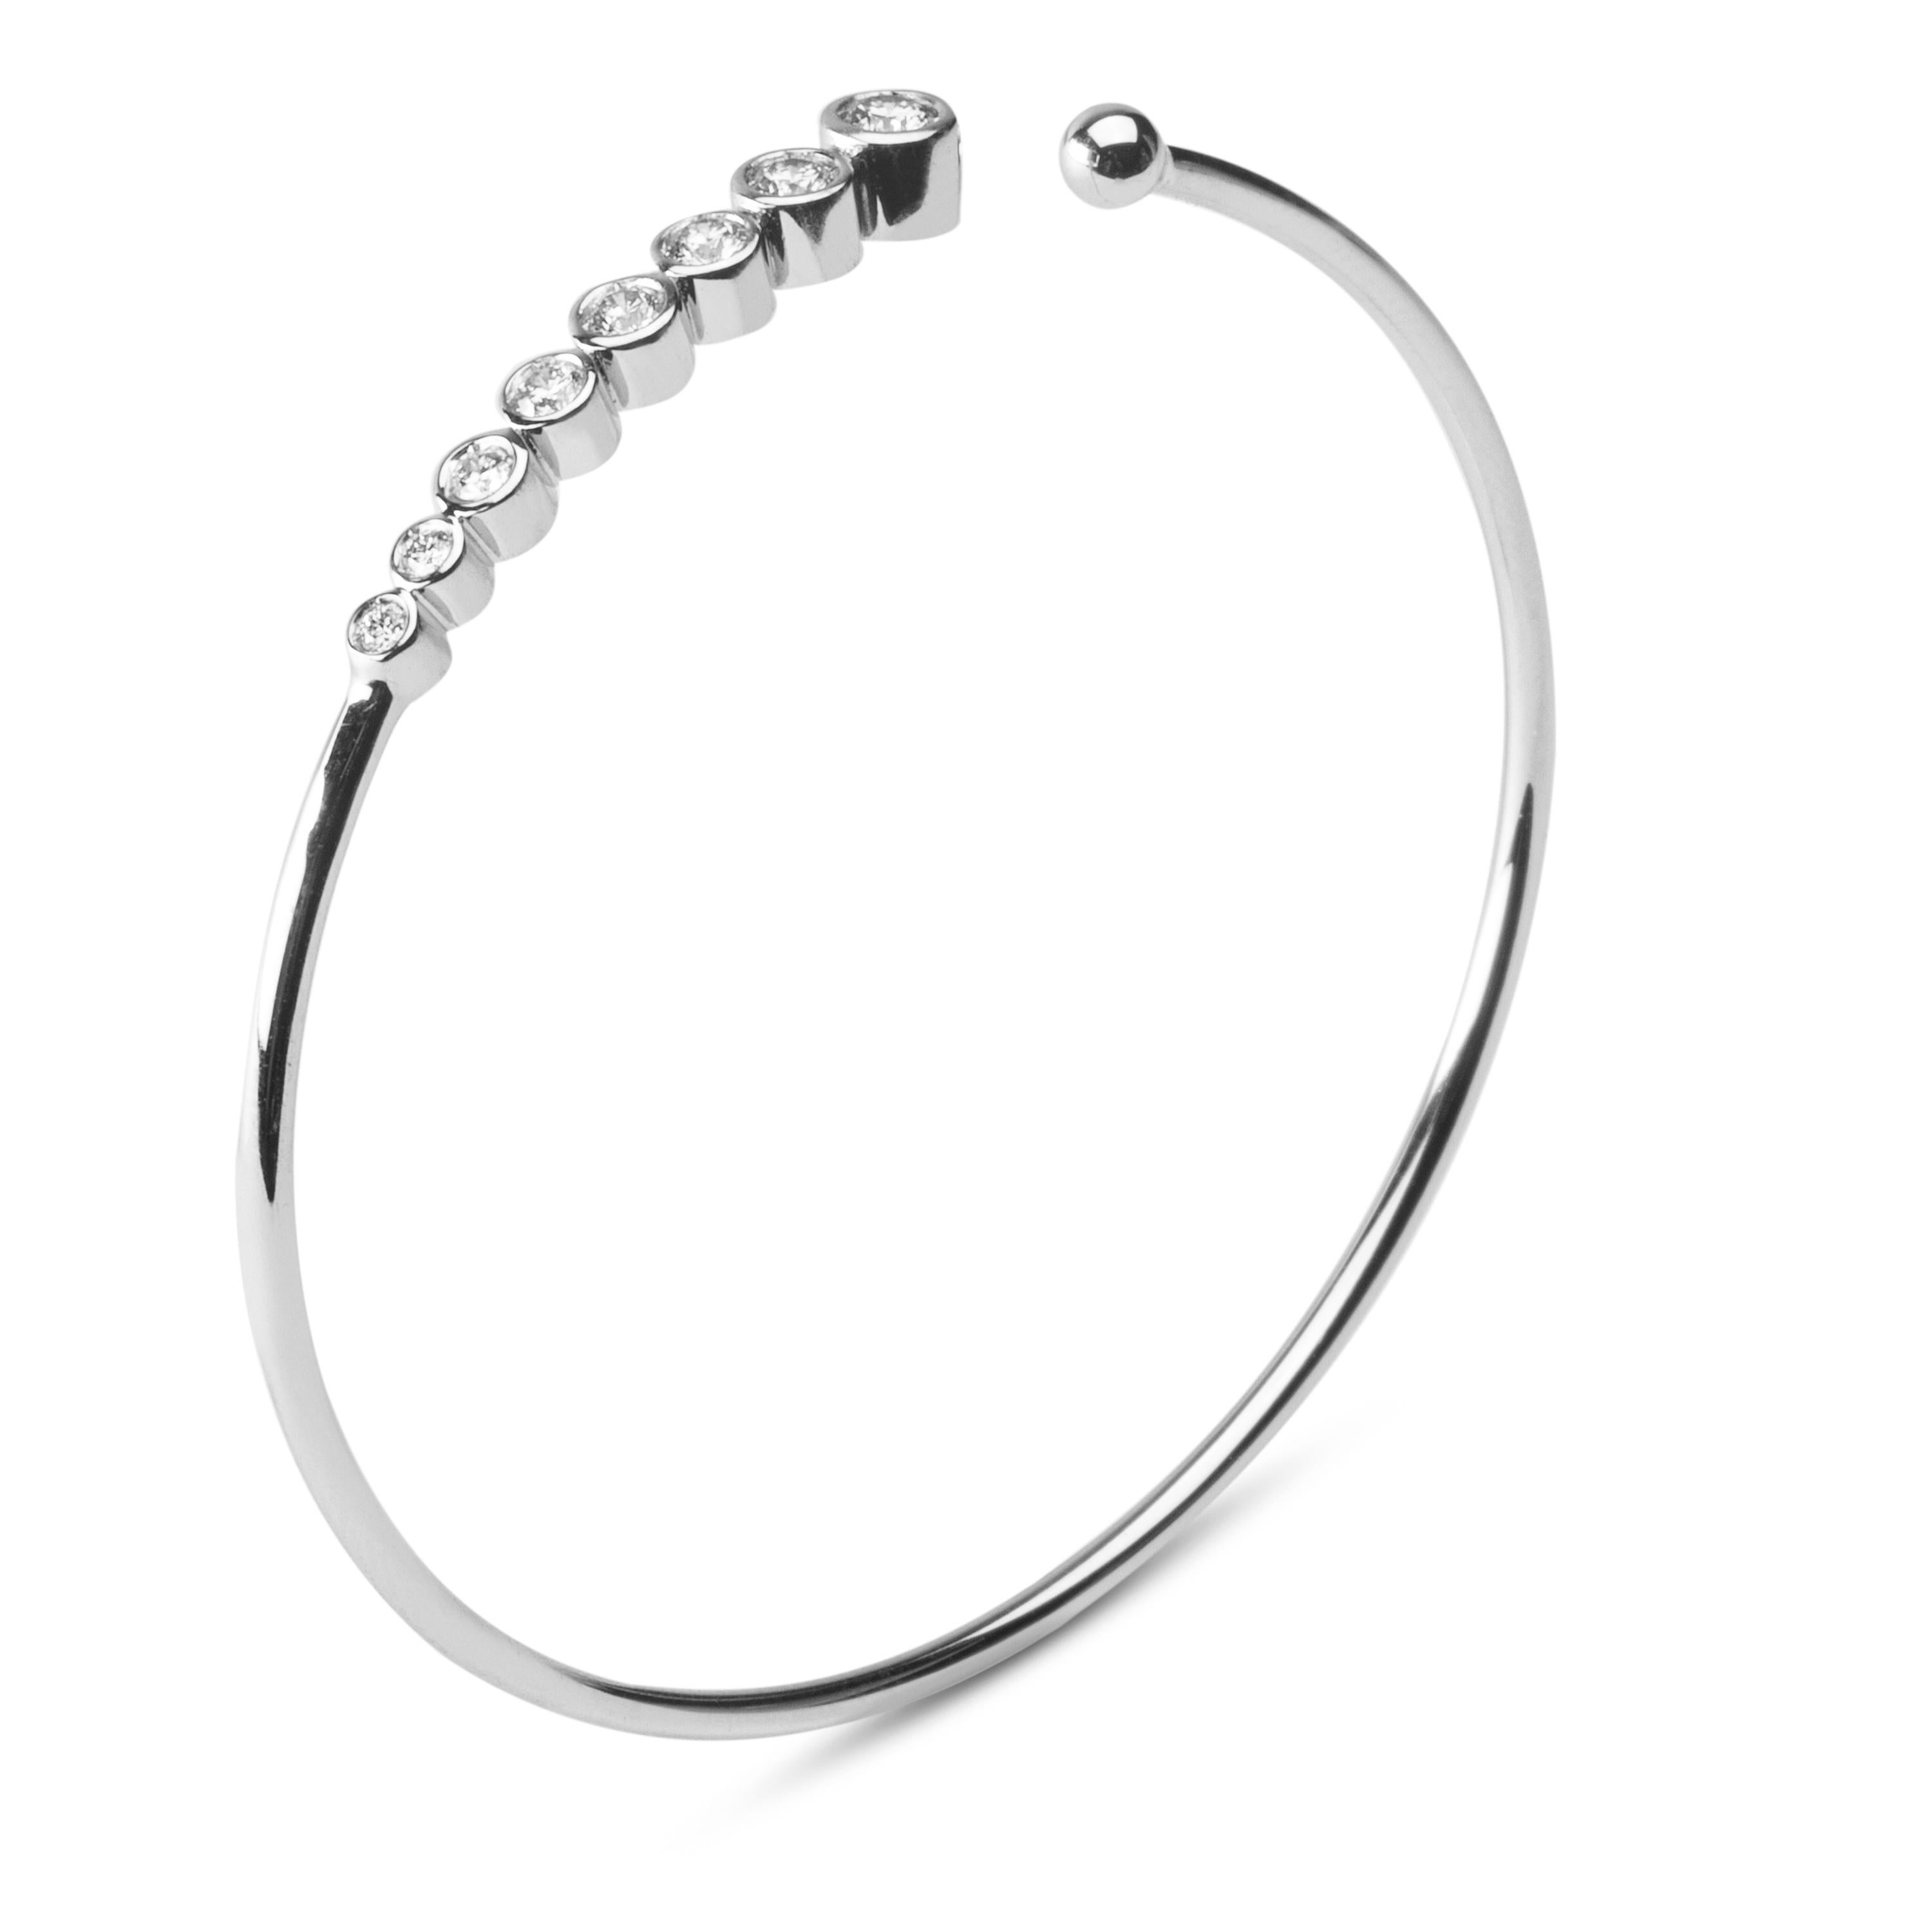 Jona design collection, hand crafted in Italy, 18 karat white gold bangle bracelet featuring 8 brilliant cut white diamonds, F color, VVS1 clarity, weighing 0.76 carats in total. 
Dimensions:
2 in. H x 2.33 in. W x 0.18 in. D
51 mm. H x 60 mm. W x 5